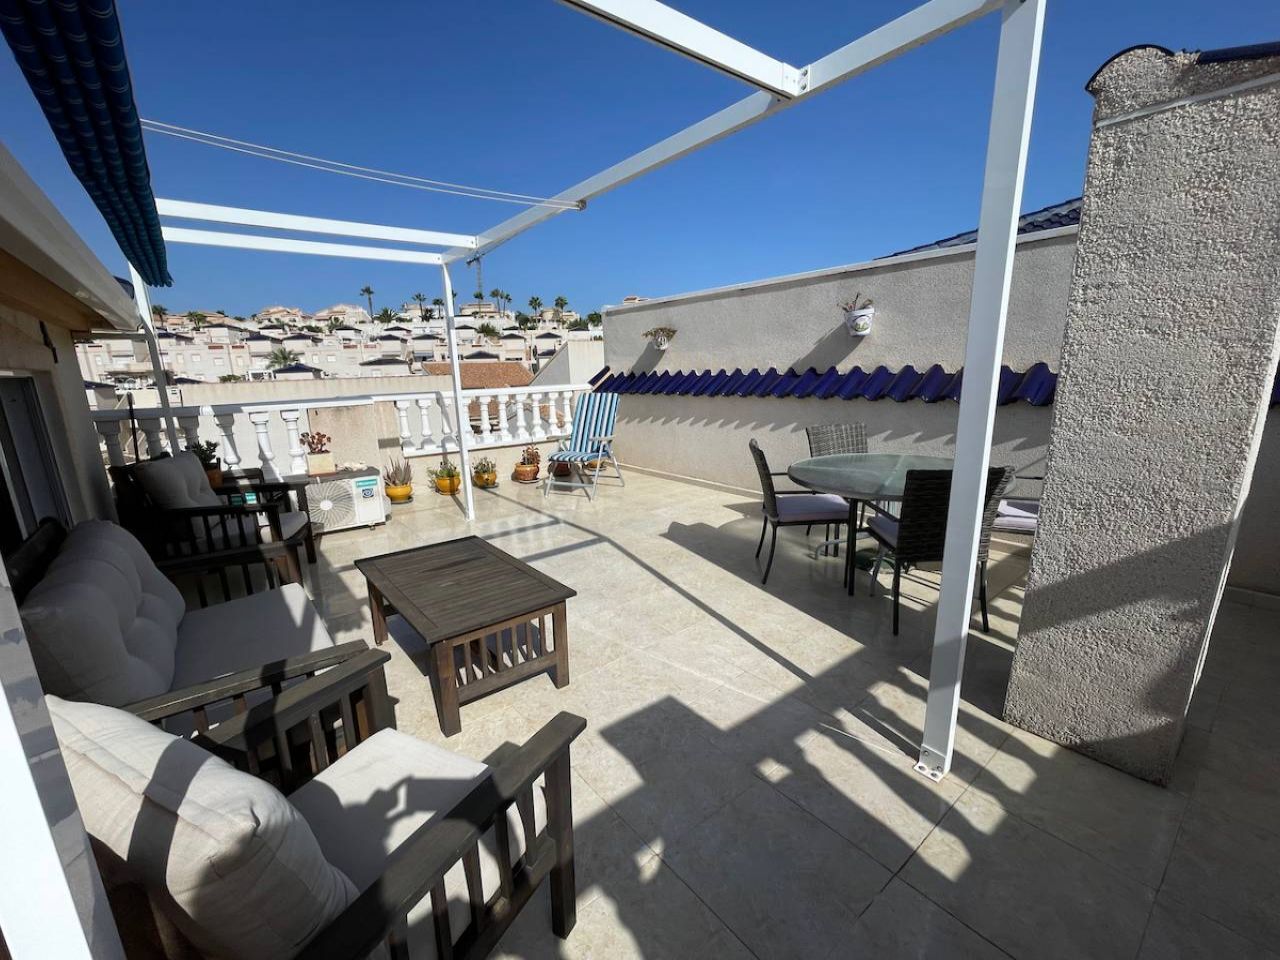 For sale: 3 bedroom apartment / flat in Rojales, Costa Blanca